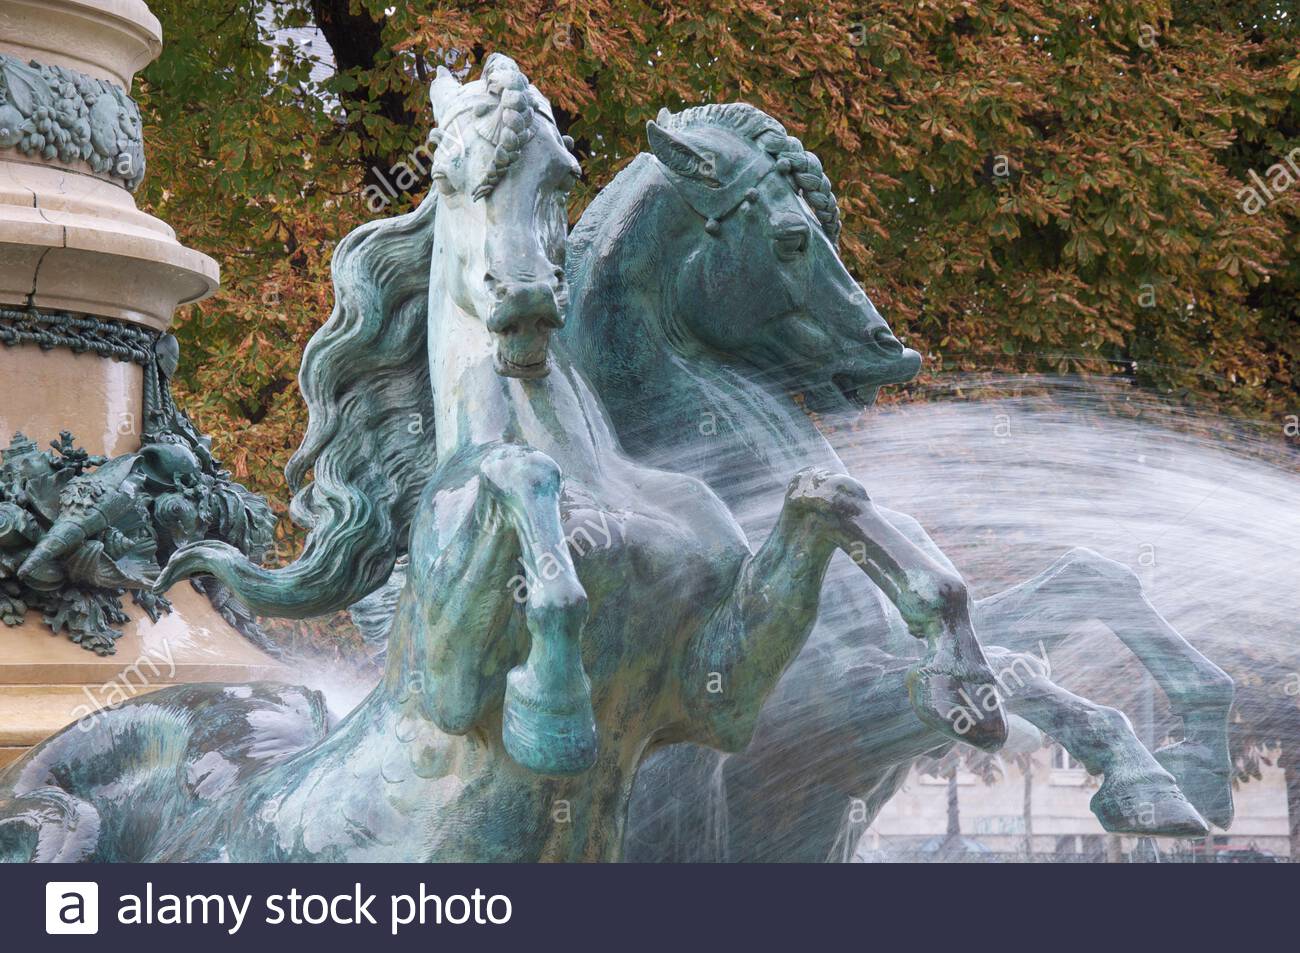 sculptures of galloping horses charging through the water jets of the monumental fontaine de lobservatoire in the jardin marco polo paris france 2AXW607